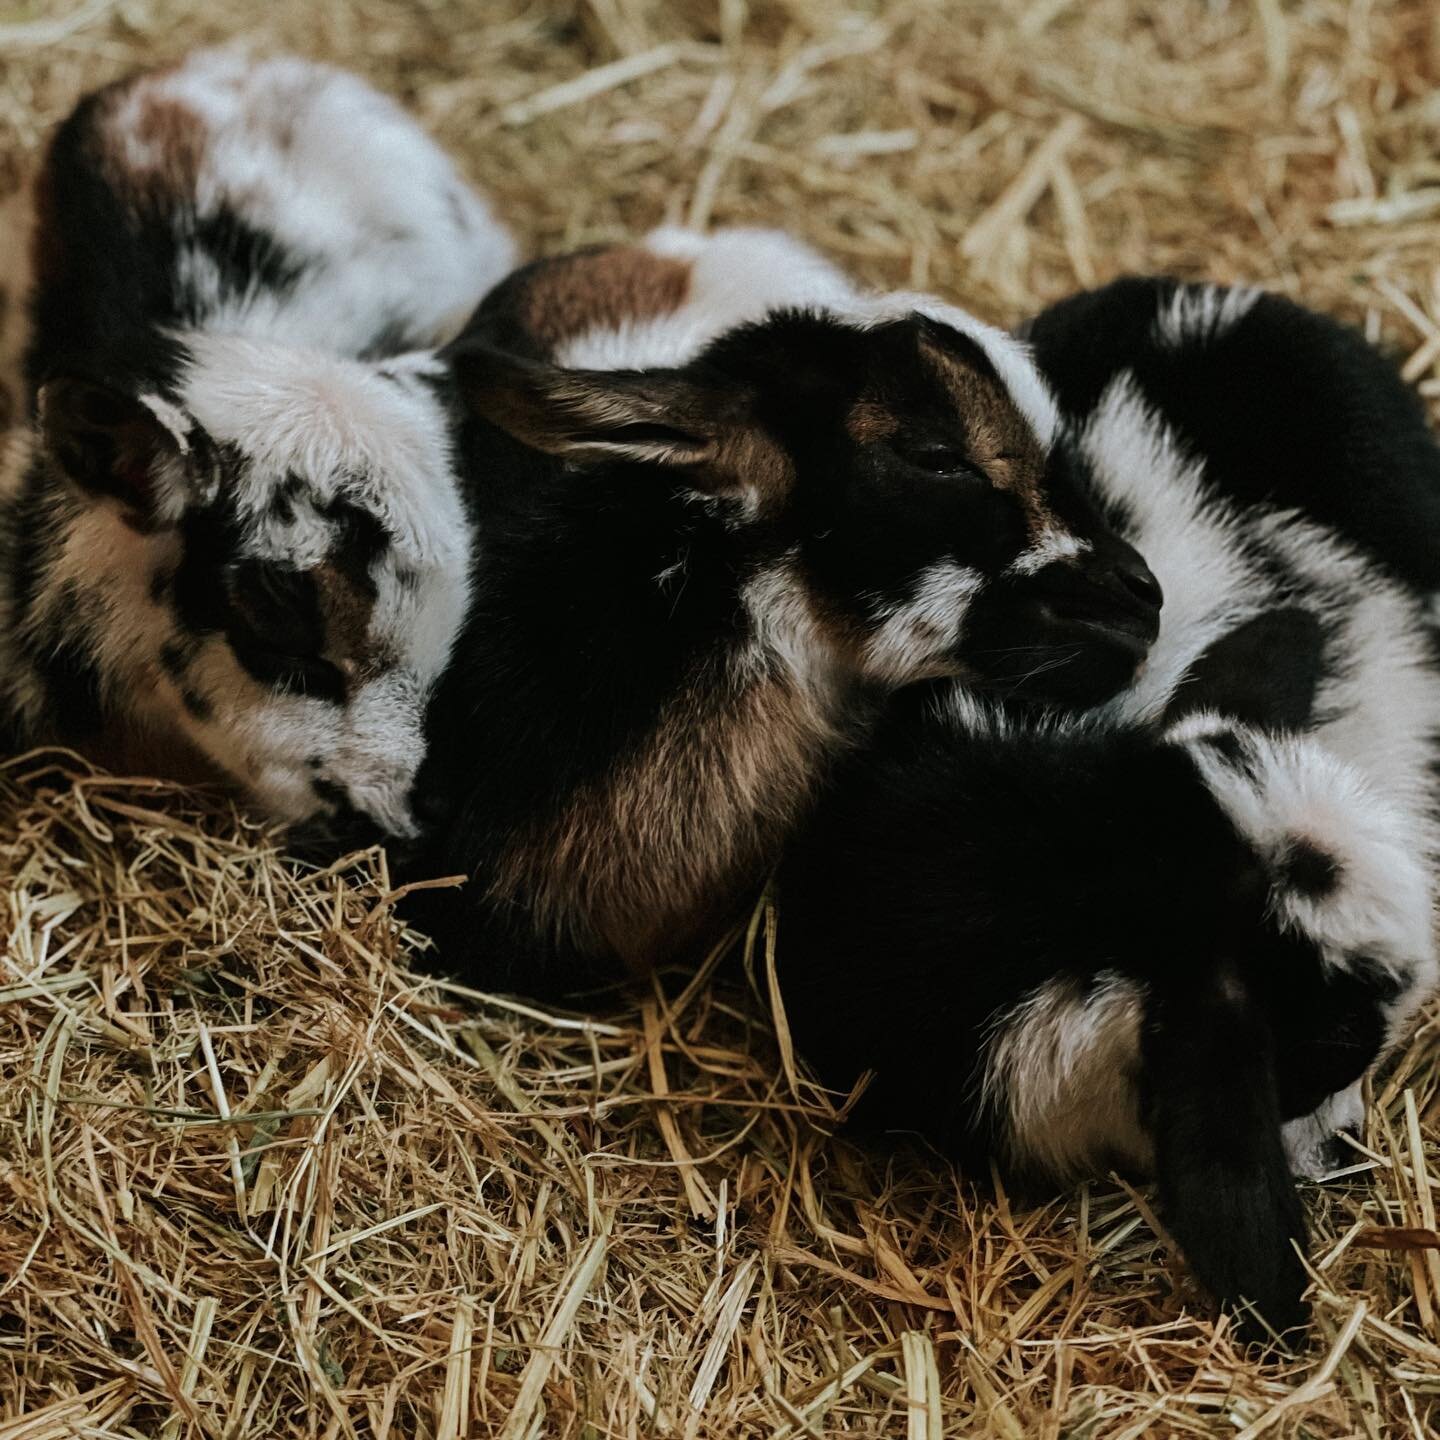 Amos, Antonio, and Anouk when they were just a few days old!😭 I needed to see some goat cuddles today. Thank you so much everyone for all your support of our farm. I appreciate every kind word and everyone checking in on us. I don&rsquo;t have the w